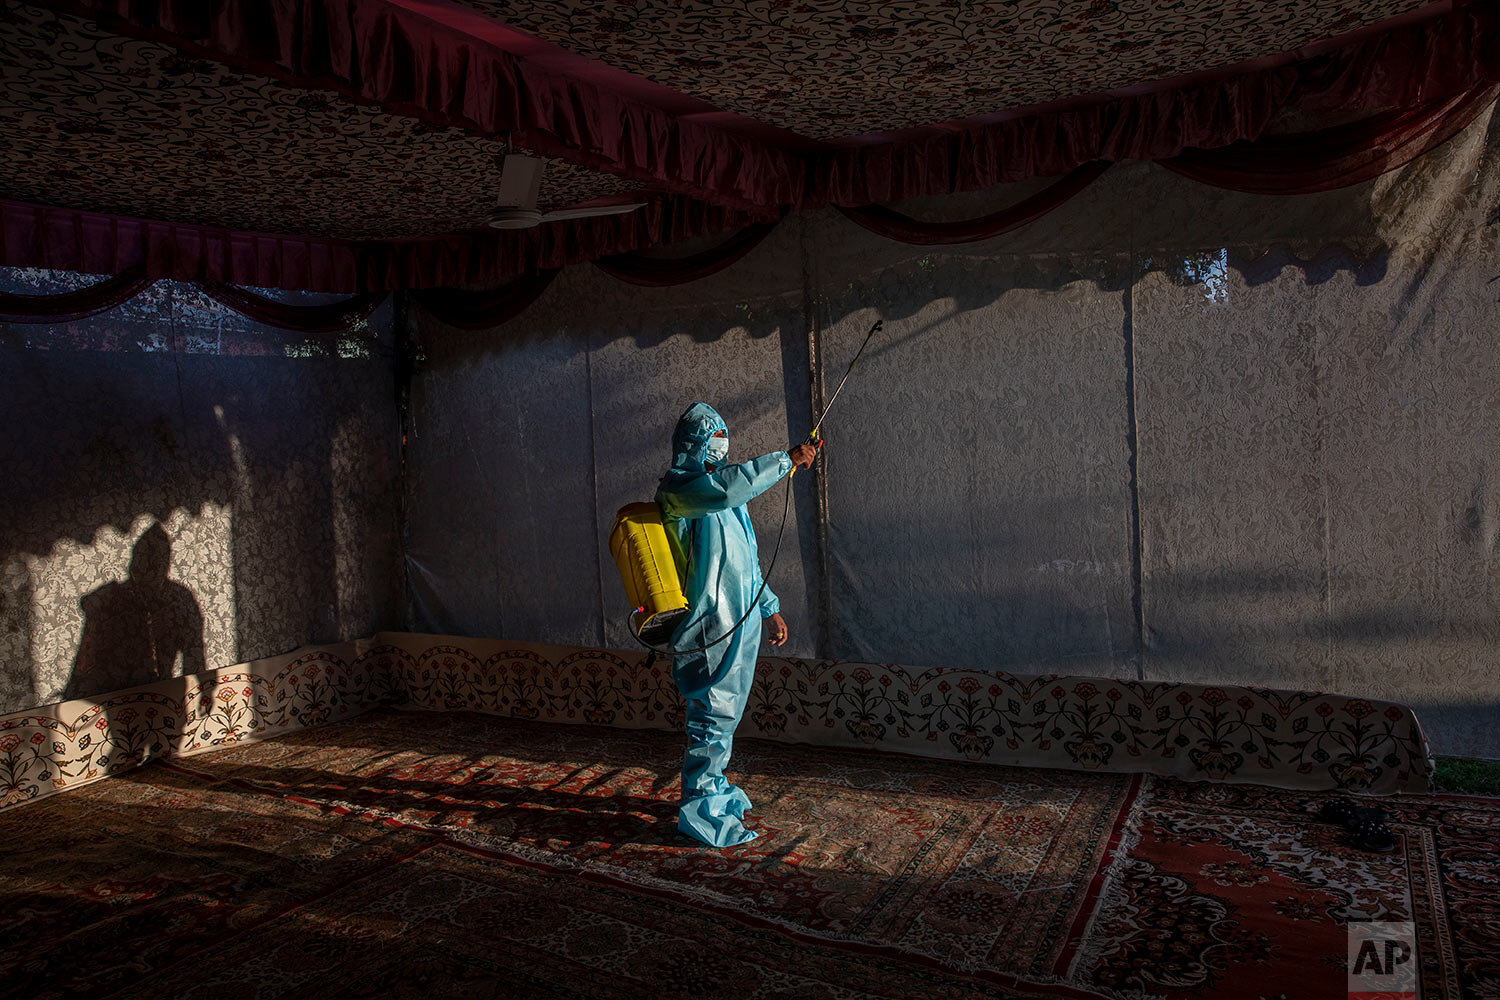  A Kashmir man in personal protective equipment sprays disinfectant to sanitize a wedding tent on the outskirts of Srinagar, Indian controlled Kashmir, Thursday, Sept. 17, 2020.  (AP Photo/ Dar Yasin) 